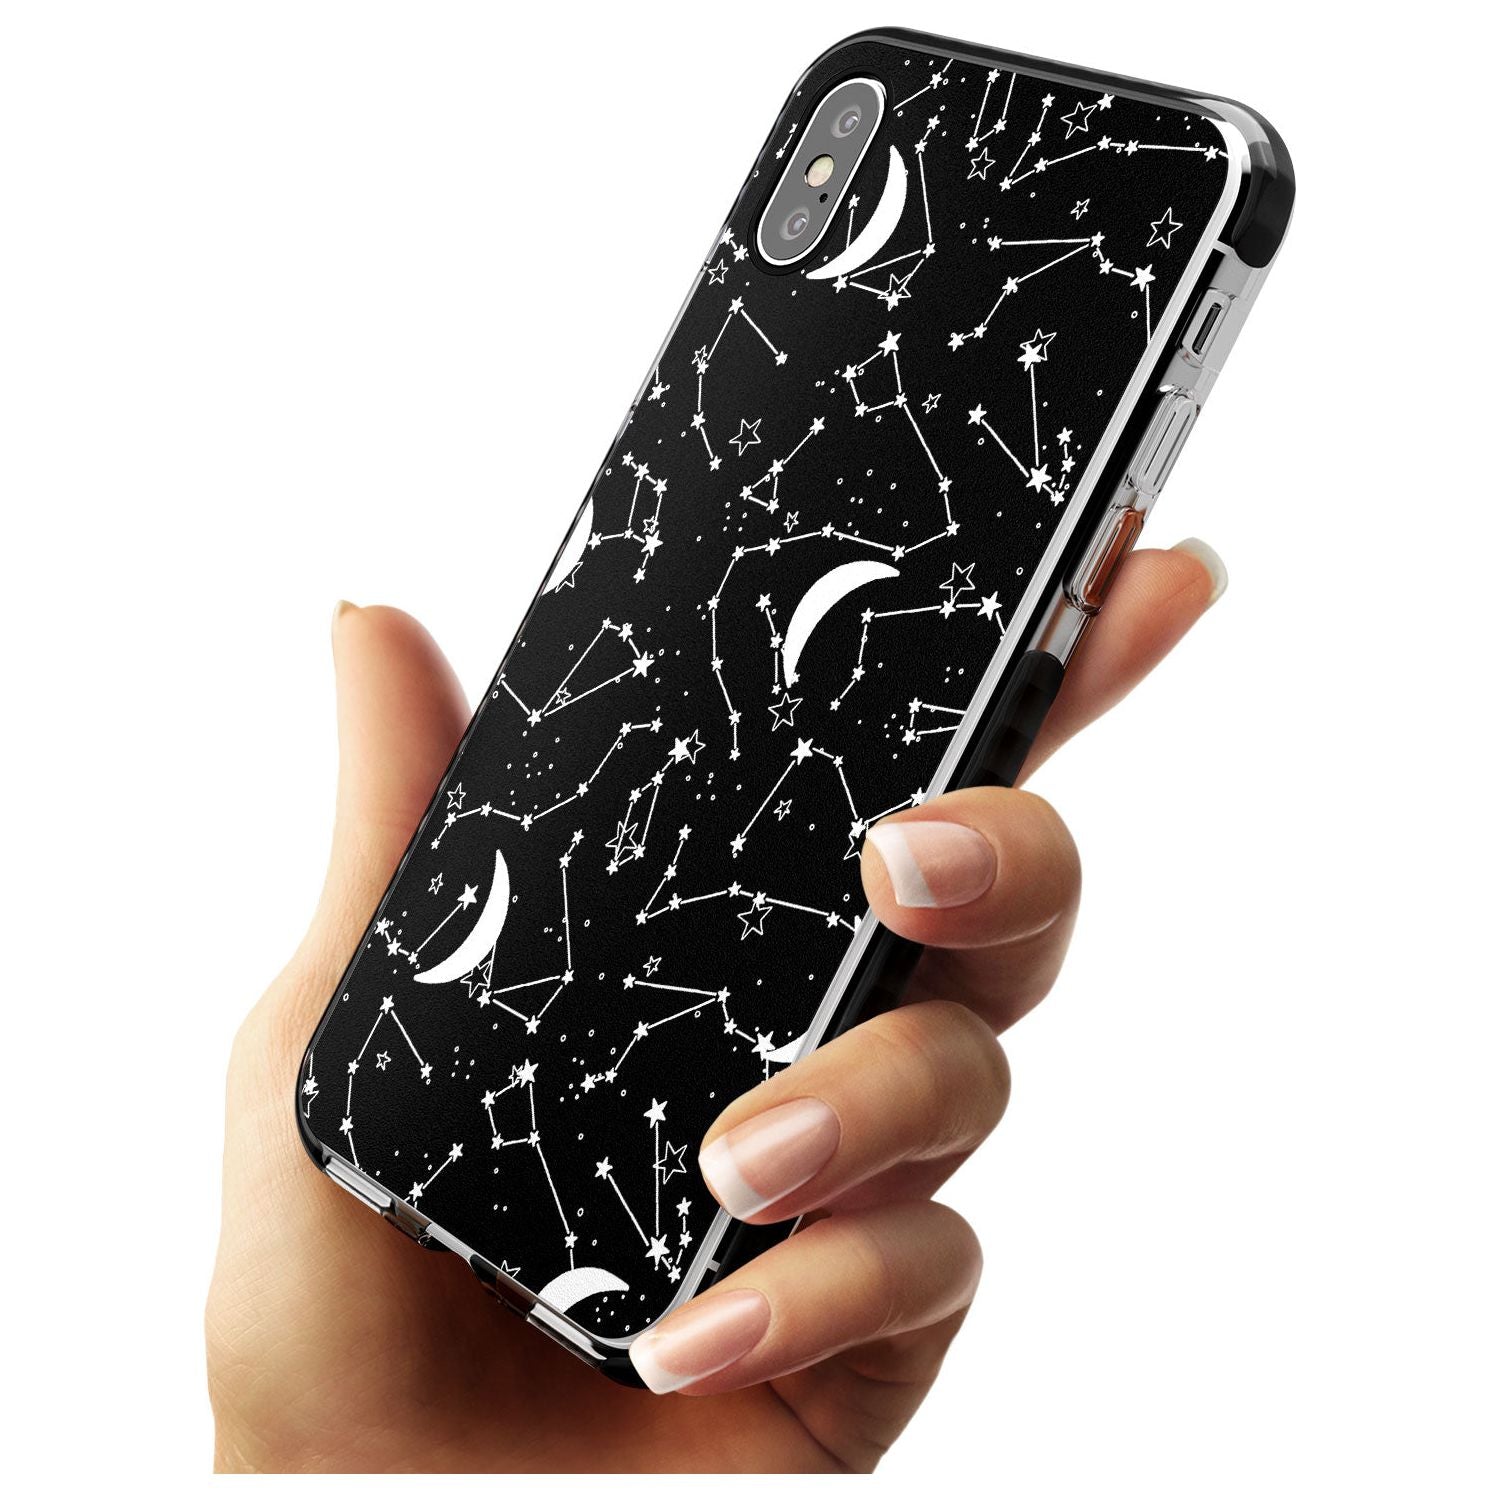 White Constellations on Black Pink Fade Impact Phone Case for iPhone X XS Max XR